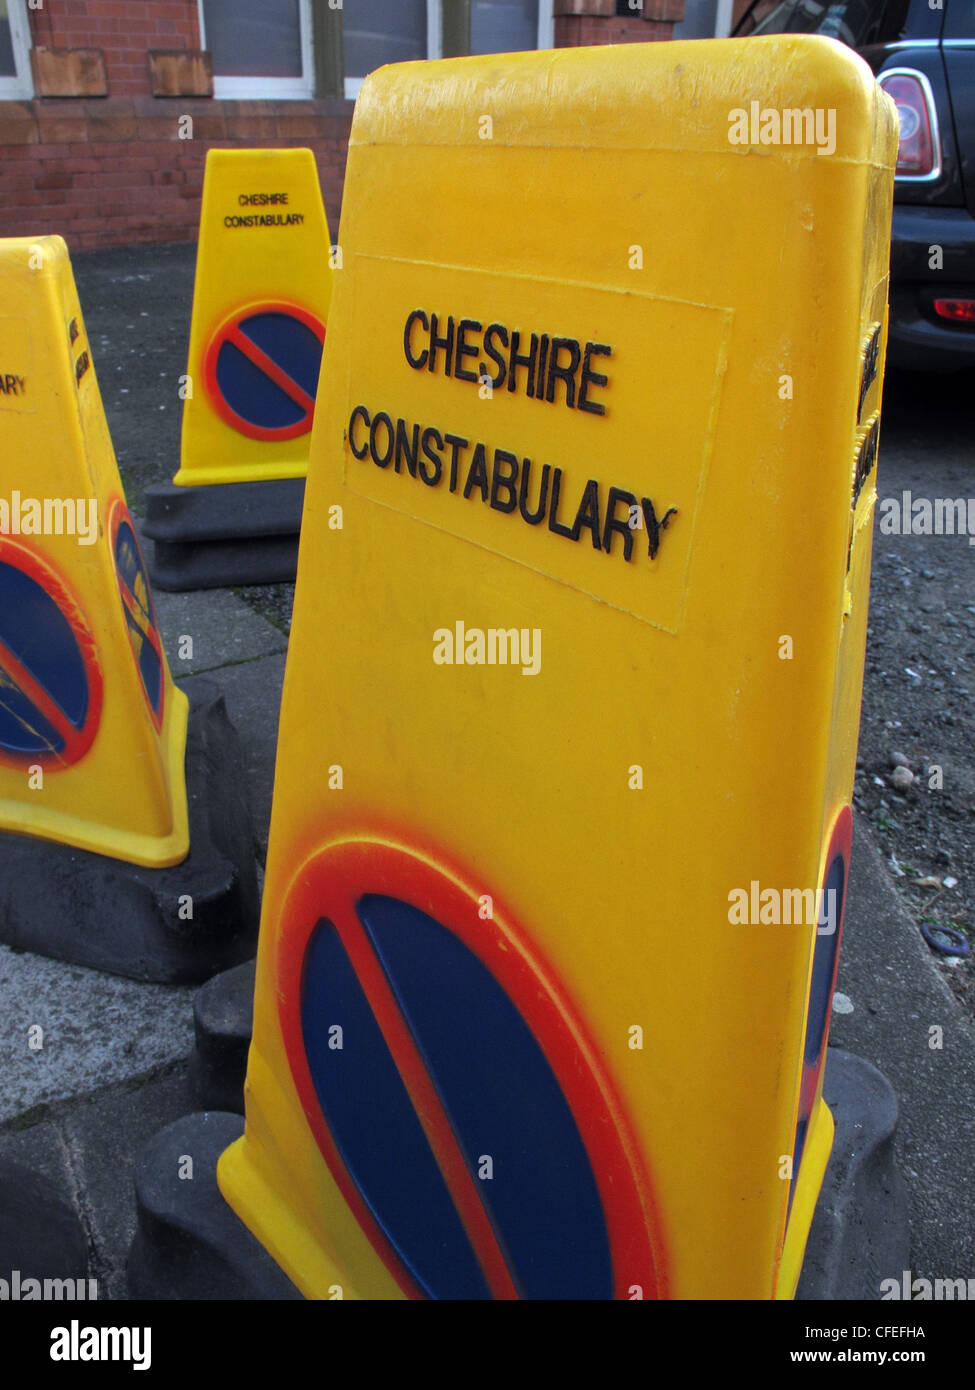 Yellow Cheshire Constabulary incident cones in road Stock Photo